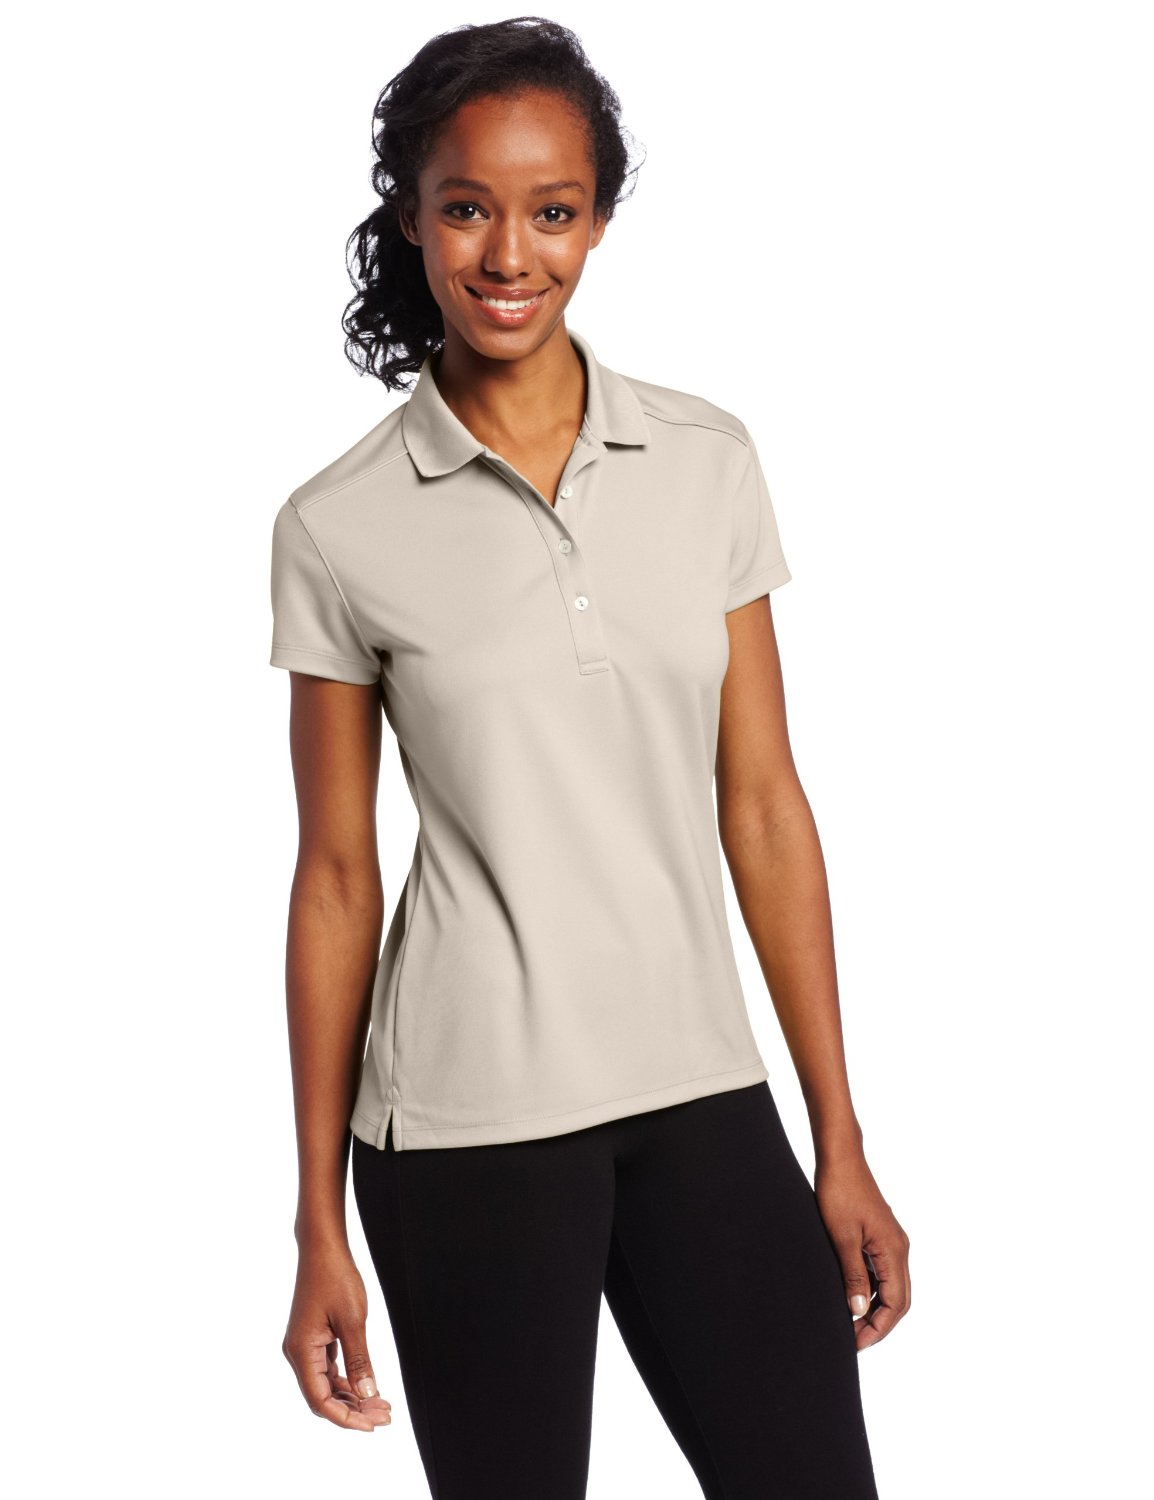 Callaway Short Sleeve Solid Double Knit Golf Polo Shirts